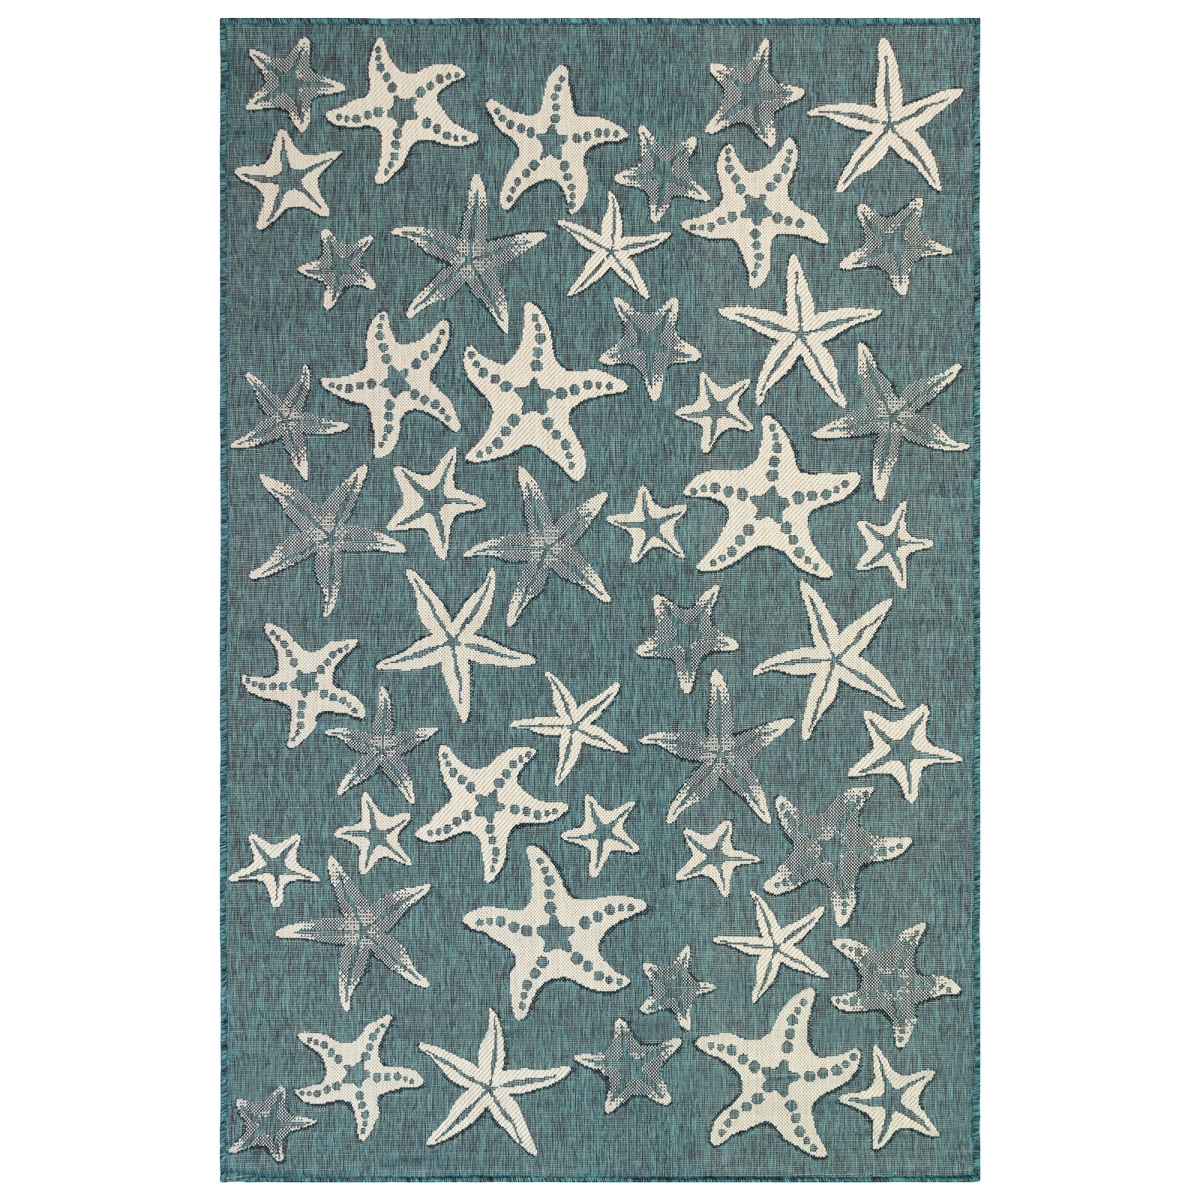 Cres8841594 Liora Manne Carmel Starfish Indoor & Outdoor Rug, Teal - Square - 7 Ft. 10 In.